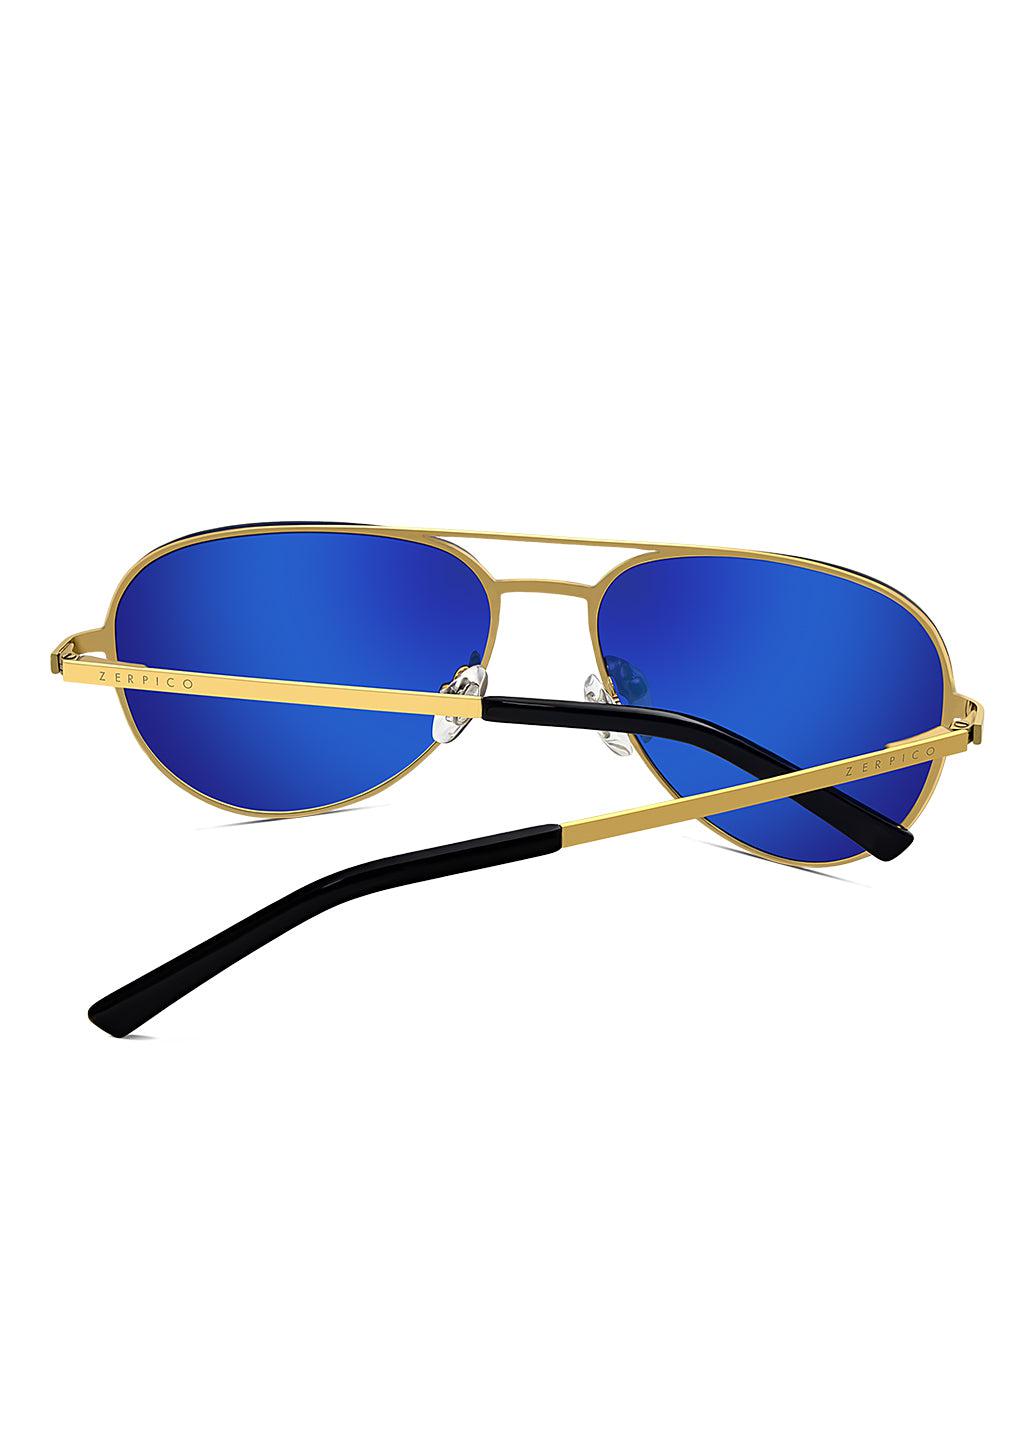 Titan - Titanium Aviator Sunglasses V2 - 24K Gold Plated with real gold. Studio photo from the back.